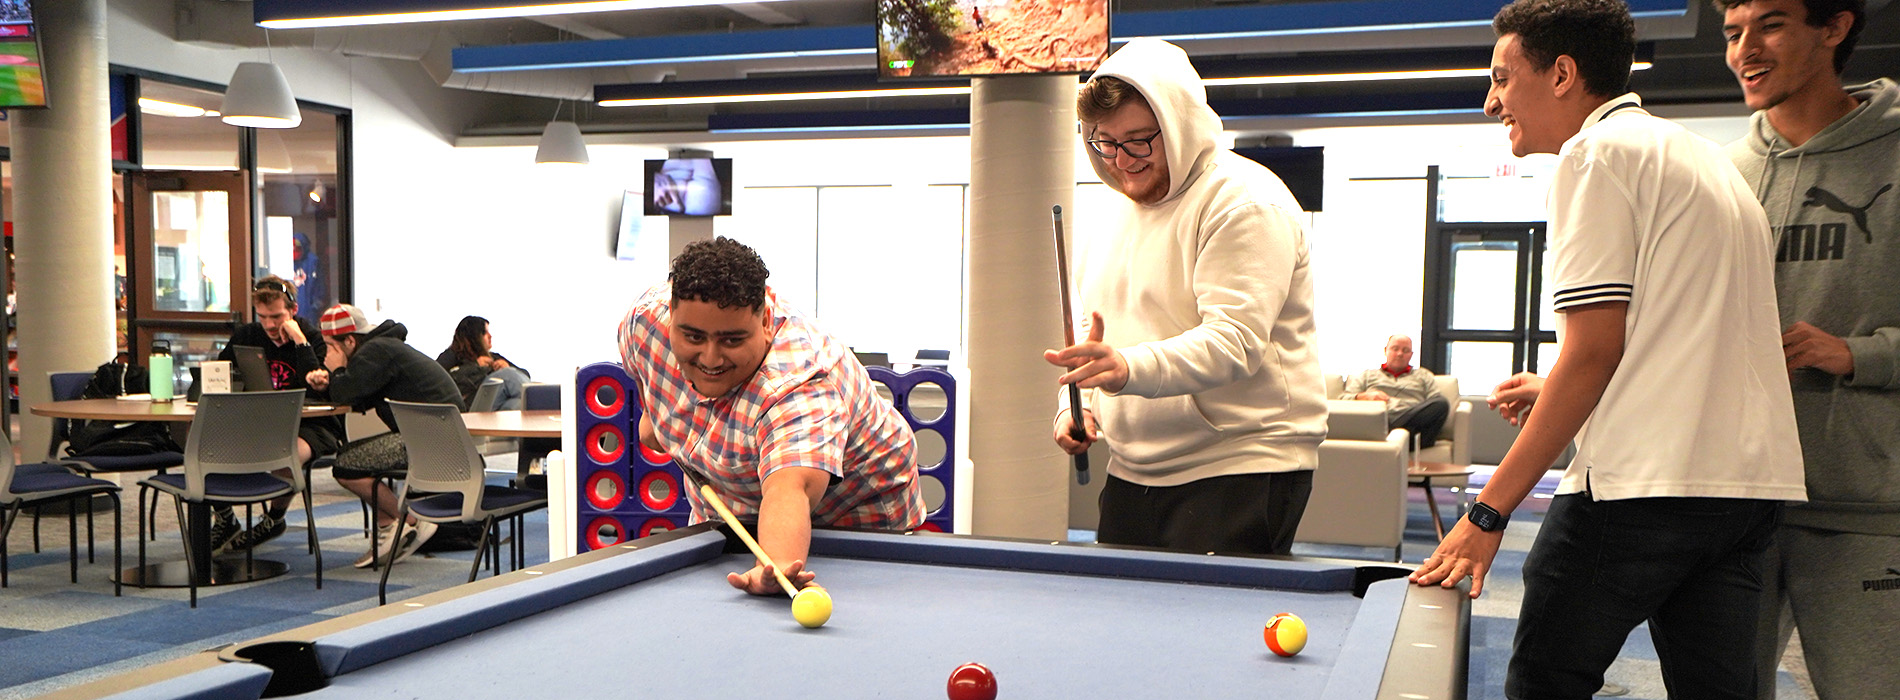 students playing pool in the student unions